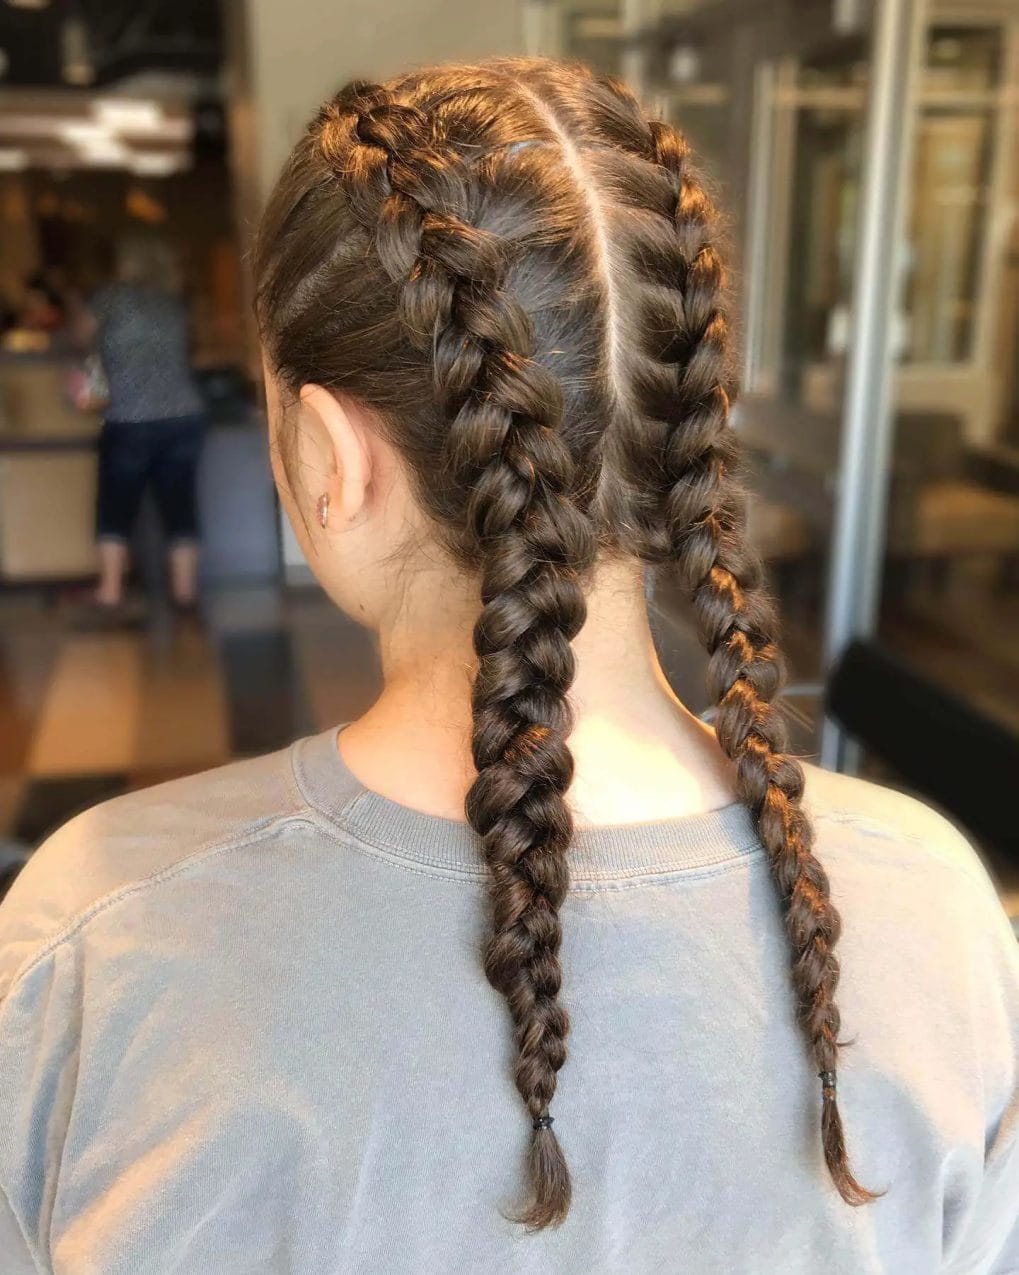 Neatly crafted chestnut braids forming twin ponytails, loosening towards the ends.